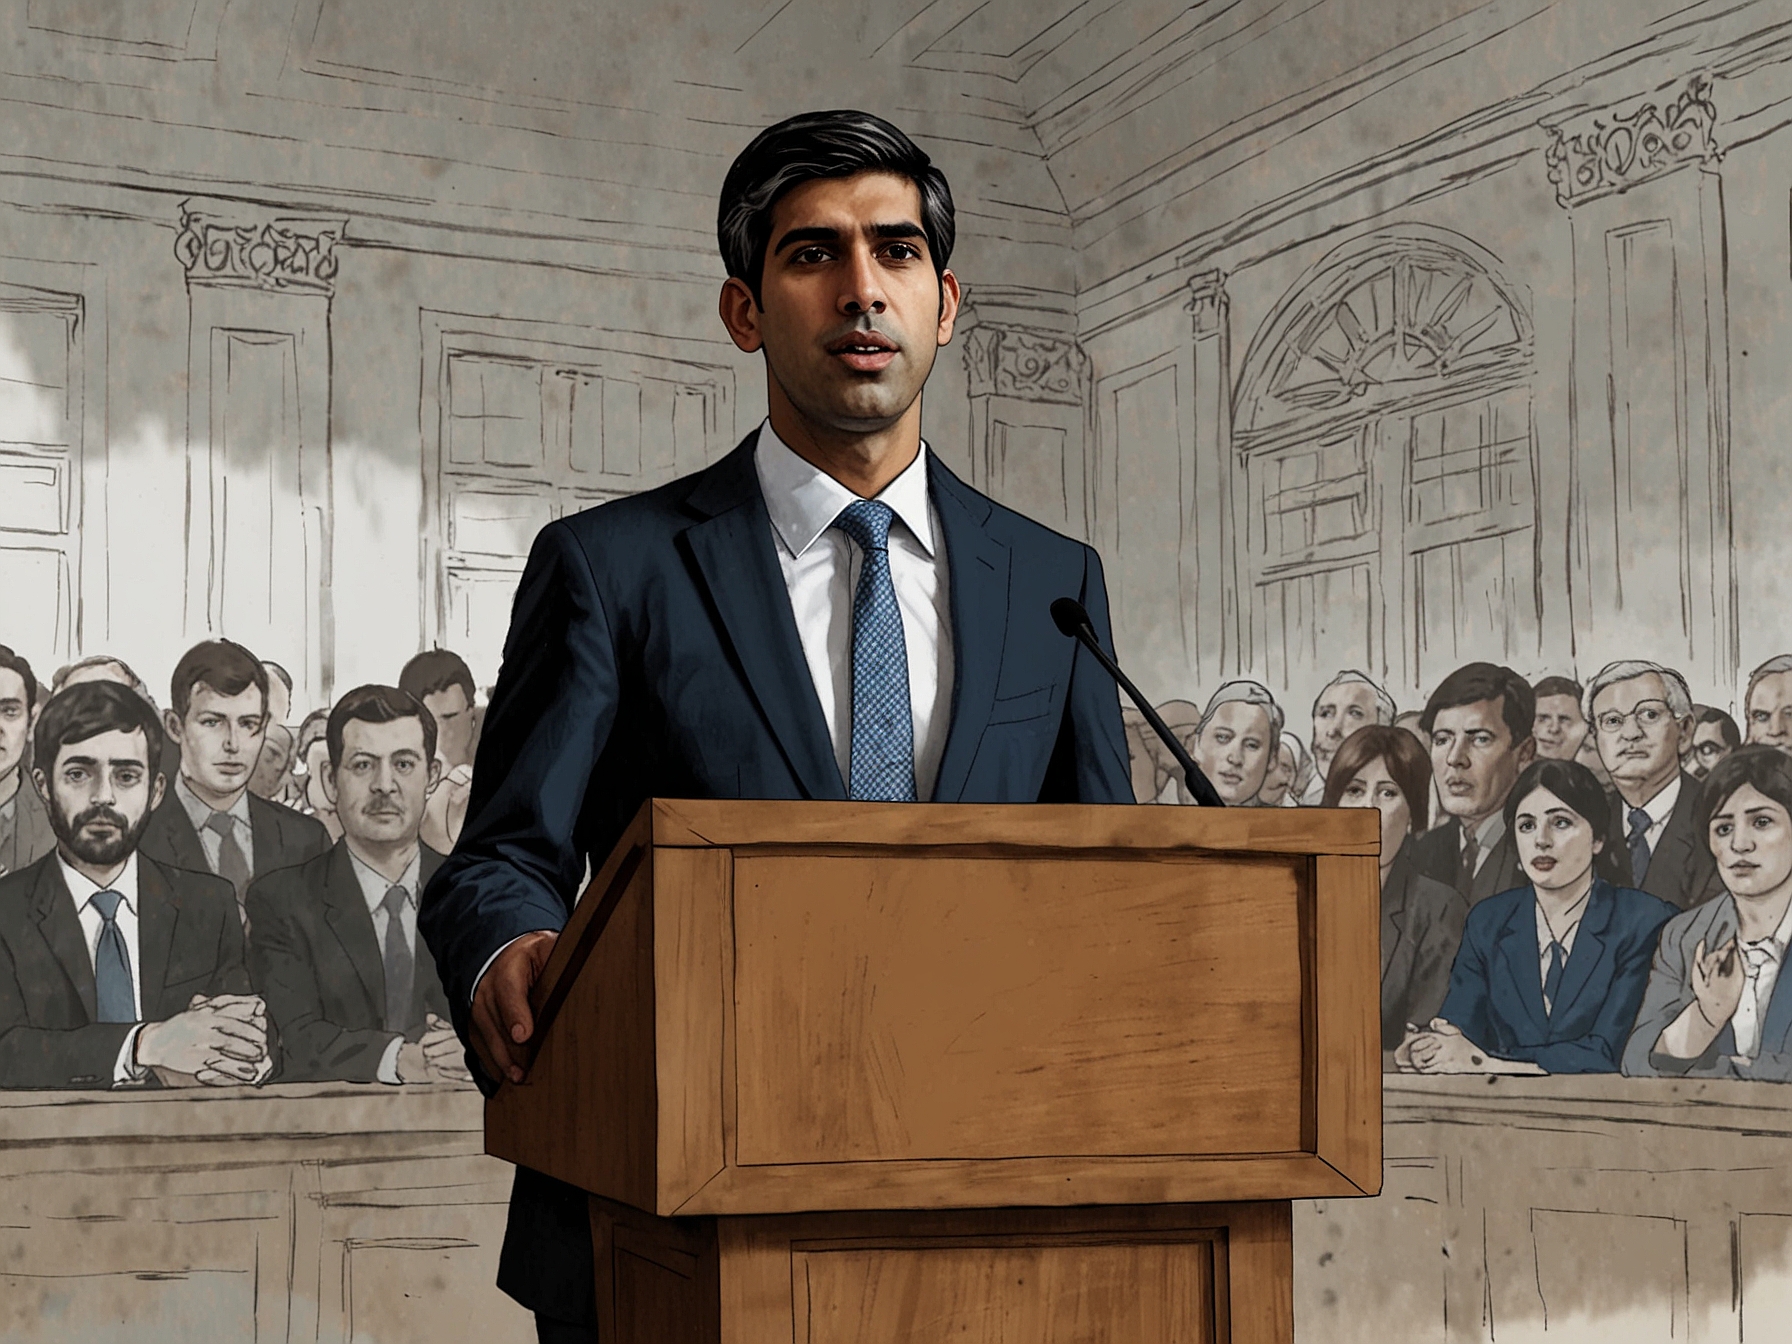 Prime Minister Rishi Sunak standing behind a podium, responding to questions about the betting investigation, indicating his stance of being unaware of further investigations involving Tory members.